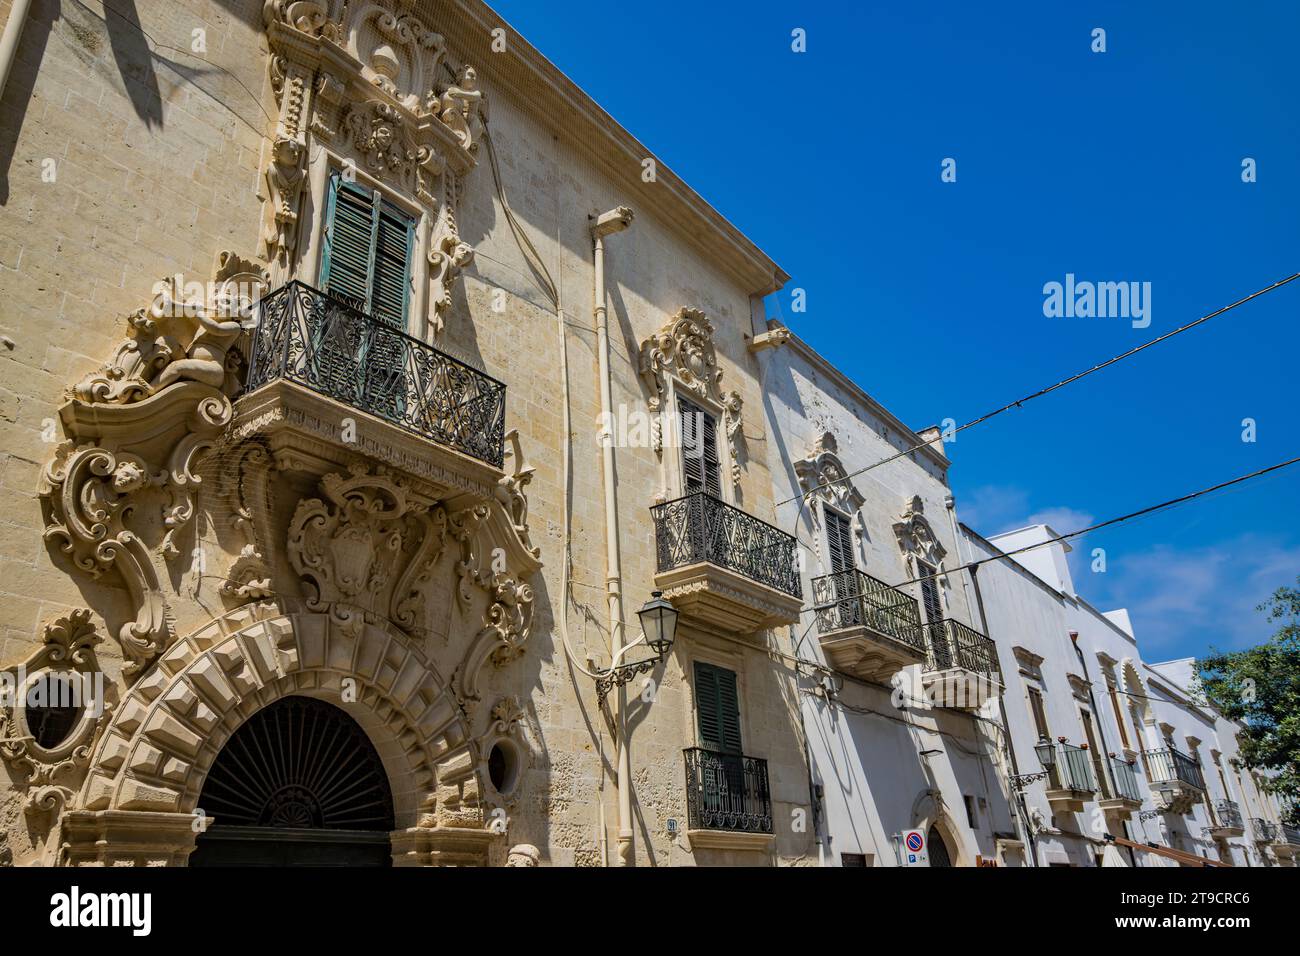 Galatina, Lecce, Puglia, Italy. Ancient village in Salento. The splendid stone buildings, in Baroque style, in the streets and narrow alleys of the hi Stock Photo